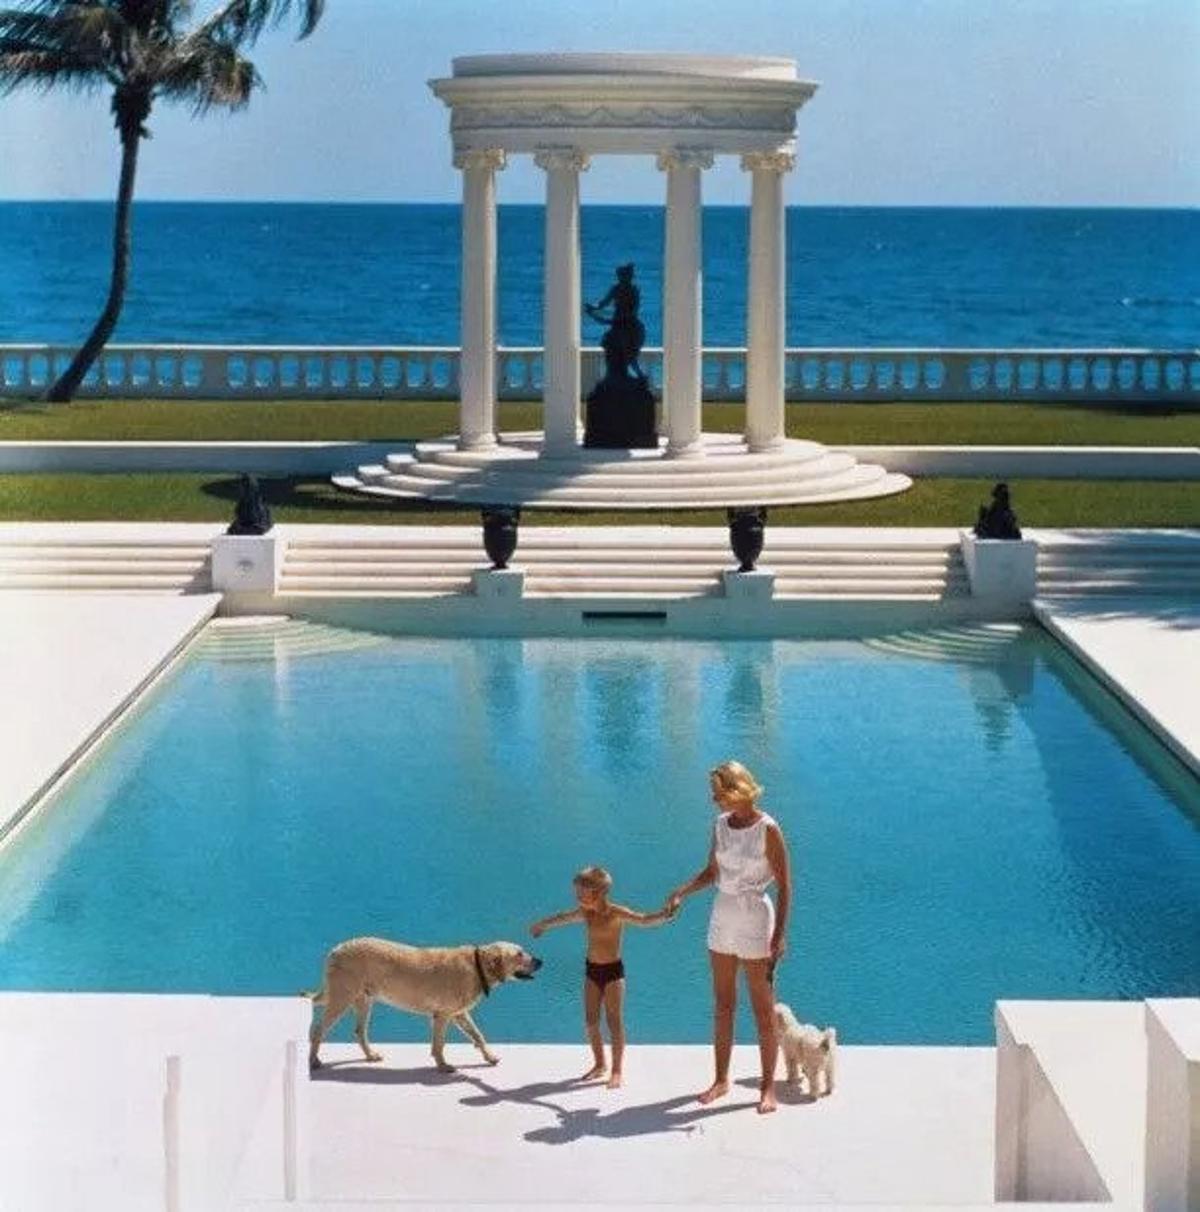 Nice Pool 
1955
by Slim Aarons

(printed 2023)
Slim Aarons Limited Estate Edition

American writer C.Z. Guest (Mrs F.C. Winston Guest, 1920 – 2003) and her son Alexander Michael Douglas Dudley Guest in front of their Grecian temple pool on the